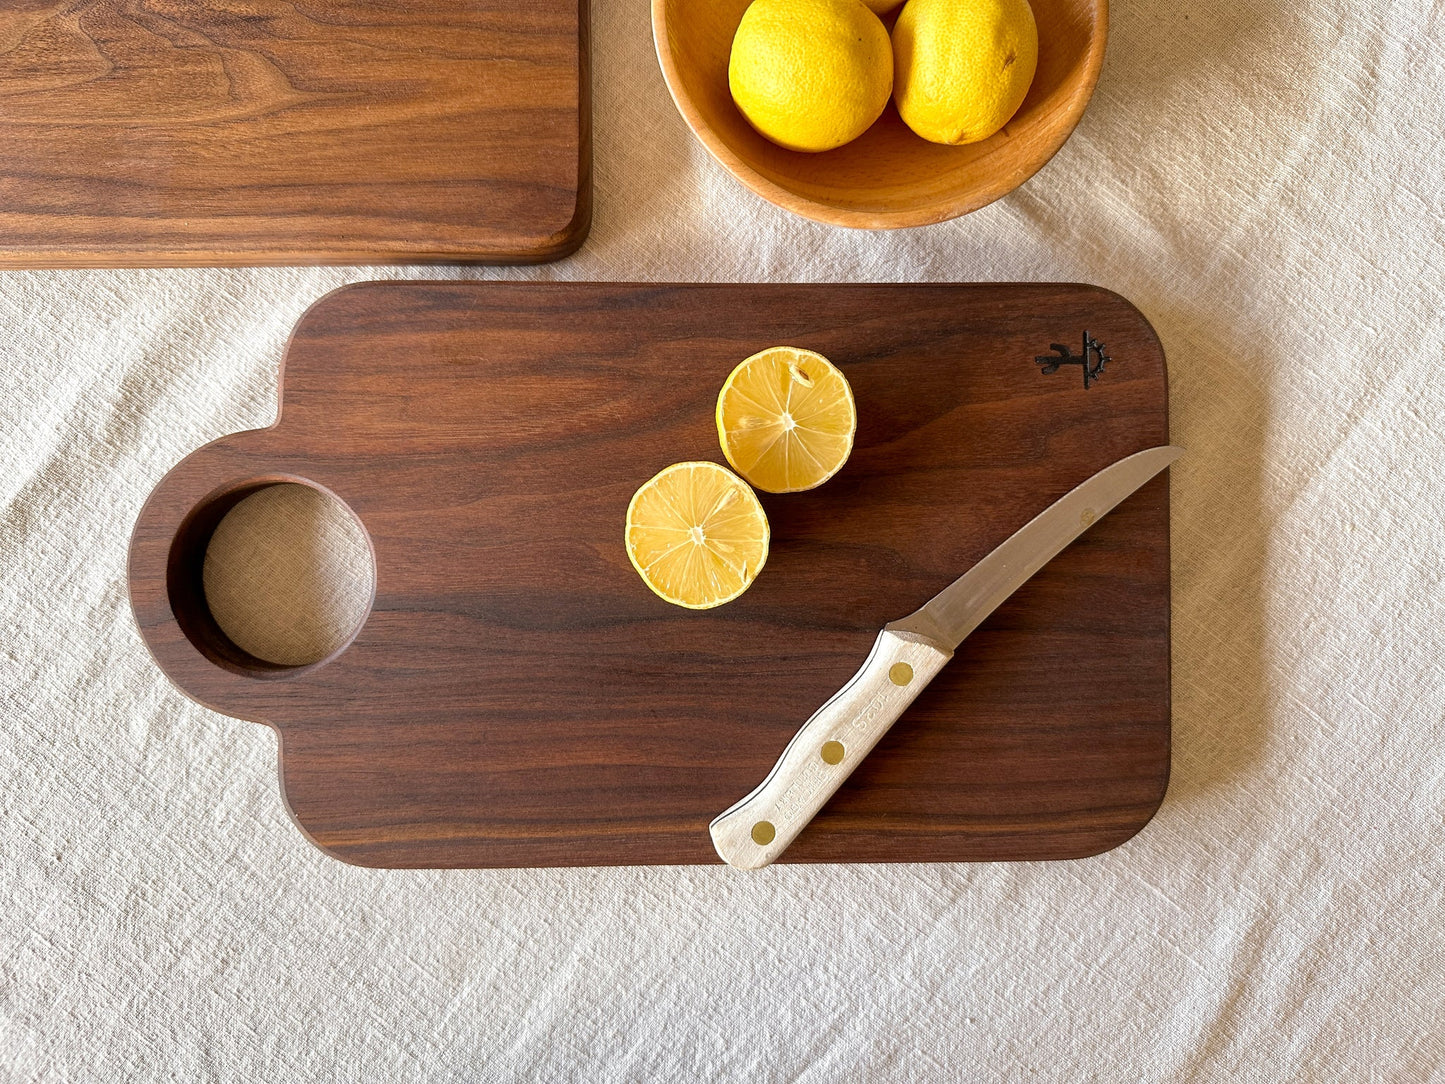 A modern design featuring a circular handle. These are made out of either hard maple that is know for its neutral grain and durable surface or dark walnut that is know for its moody grain with stripes of caramel. Great boards to grab for a quick chop or made as your designated home bar board for citrus.